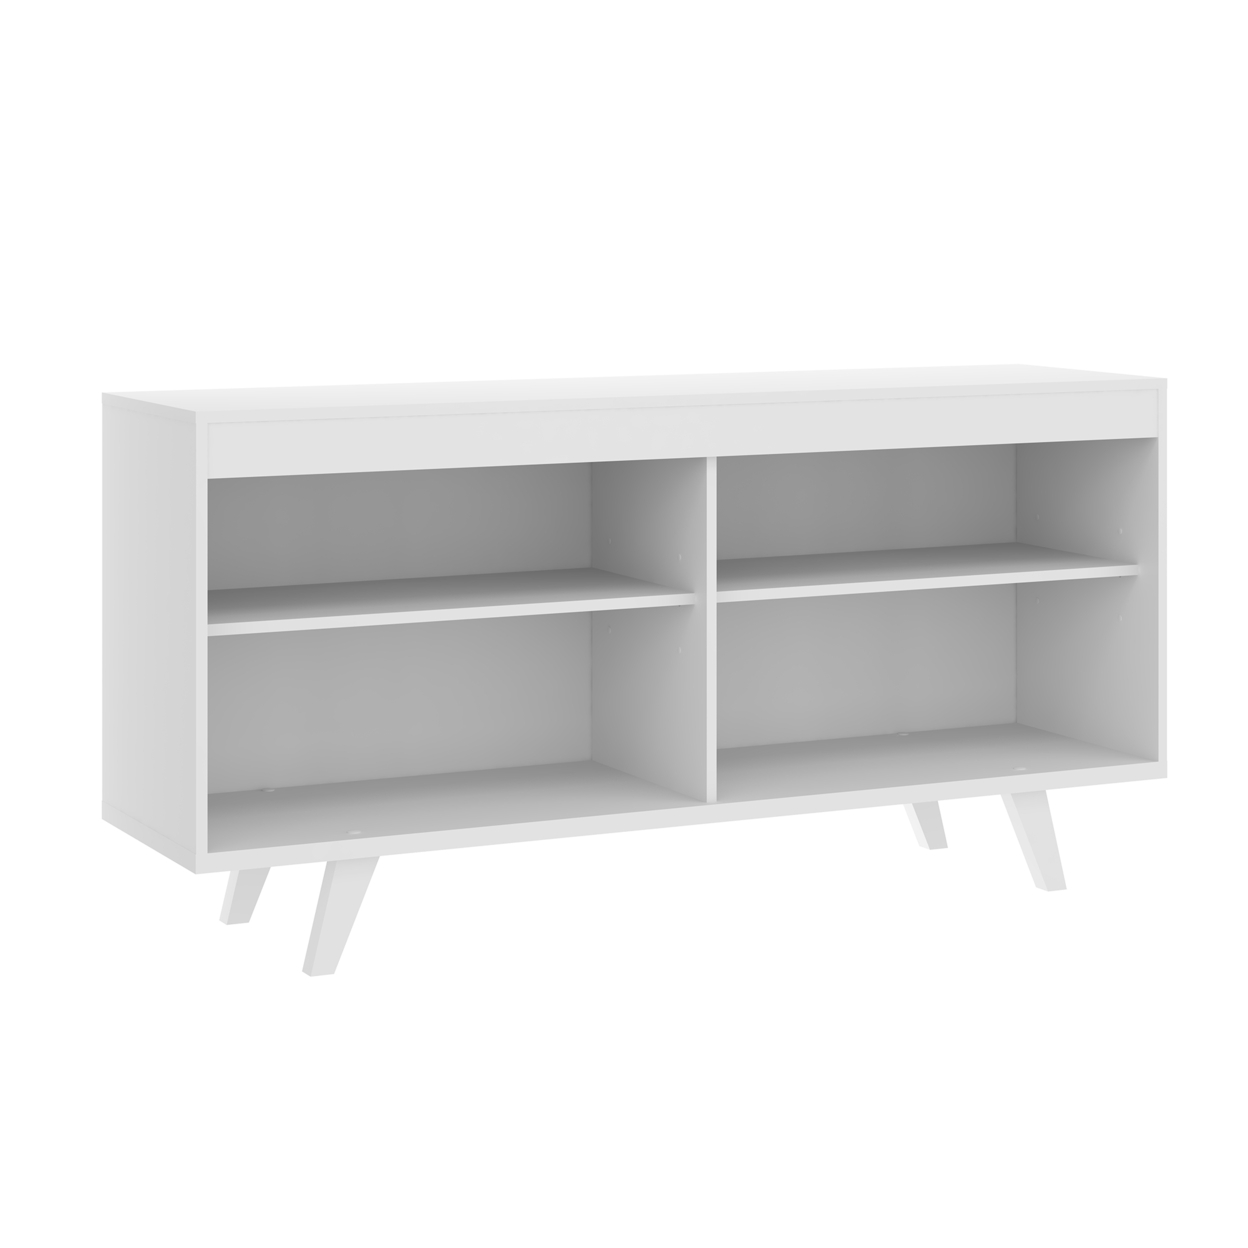 58 Inch Handcrafted Wood TV Media Entertainment Center Console, 4 Open Compartments, Angled Legs, White, Saltoro Sherpi